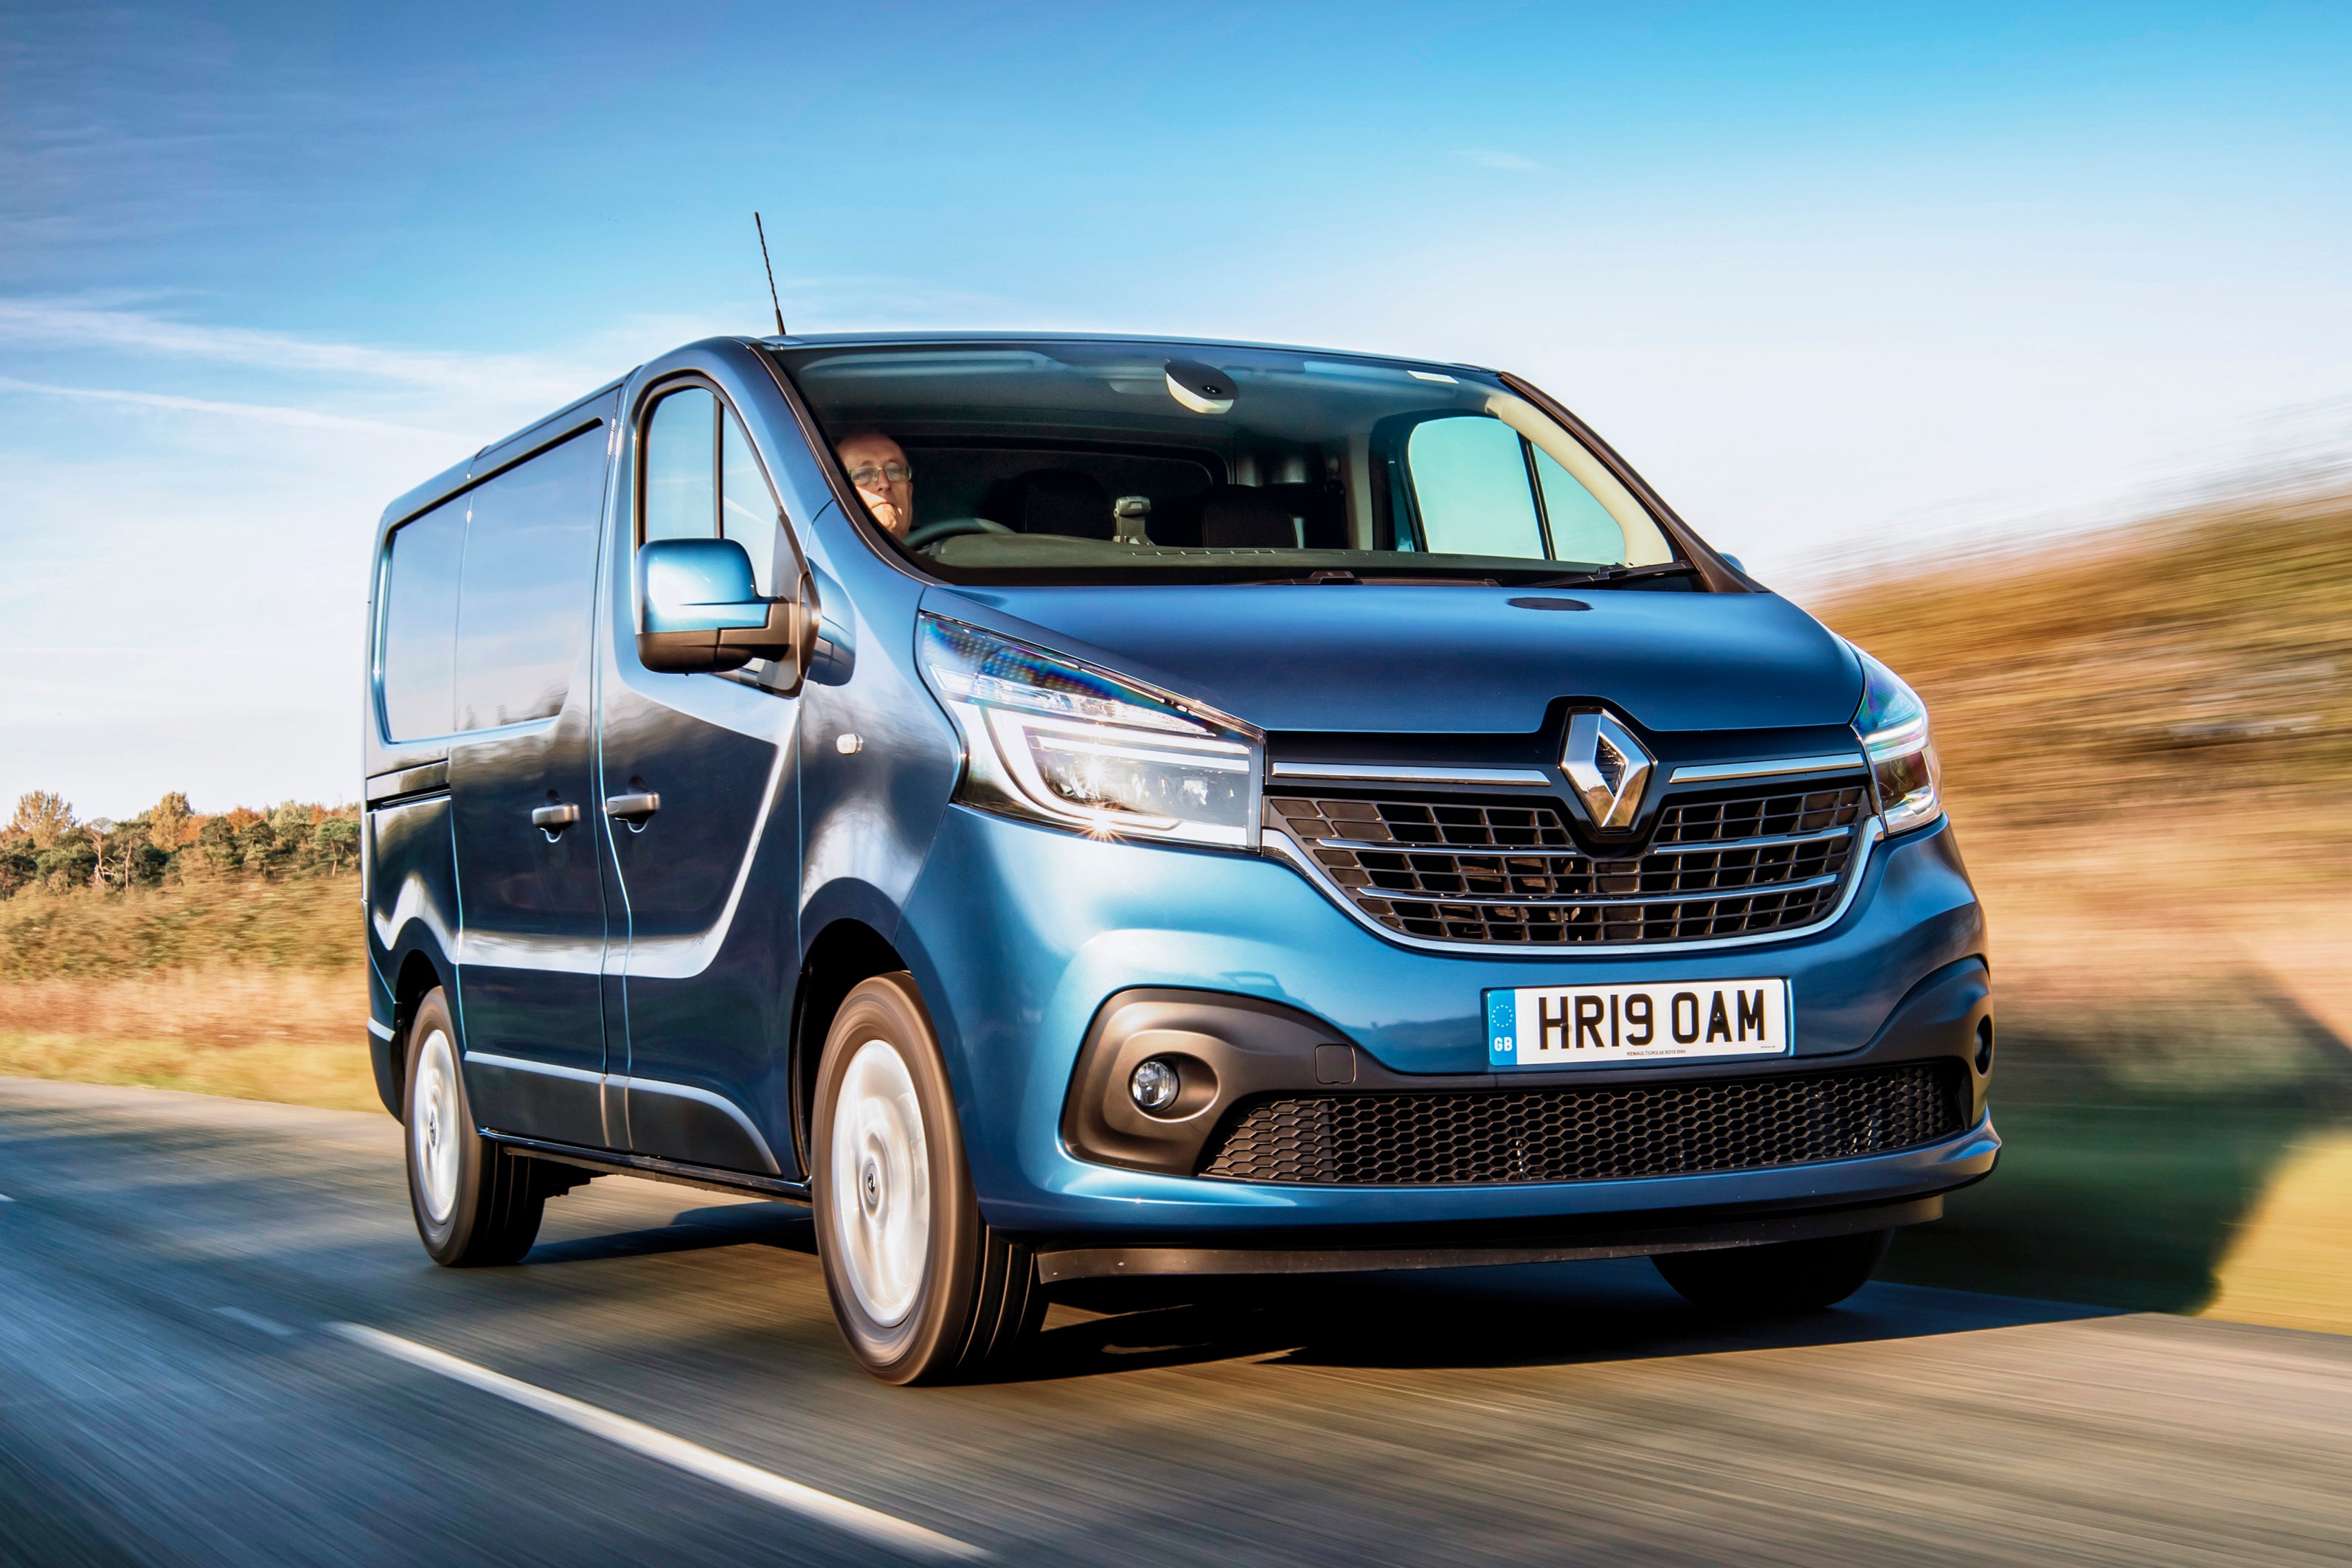 Renault Trafic Side Front View